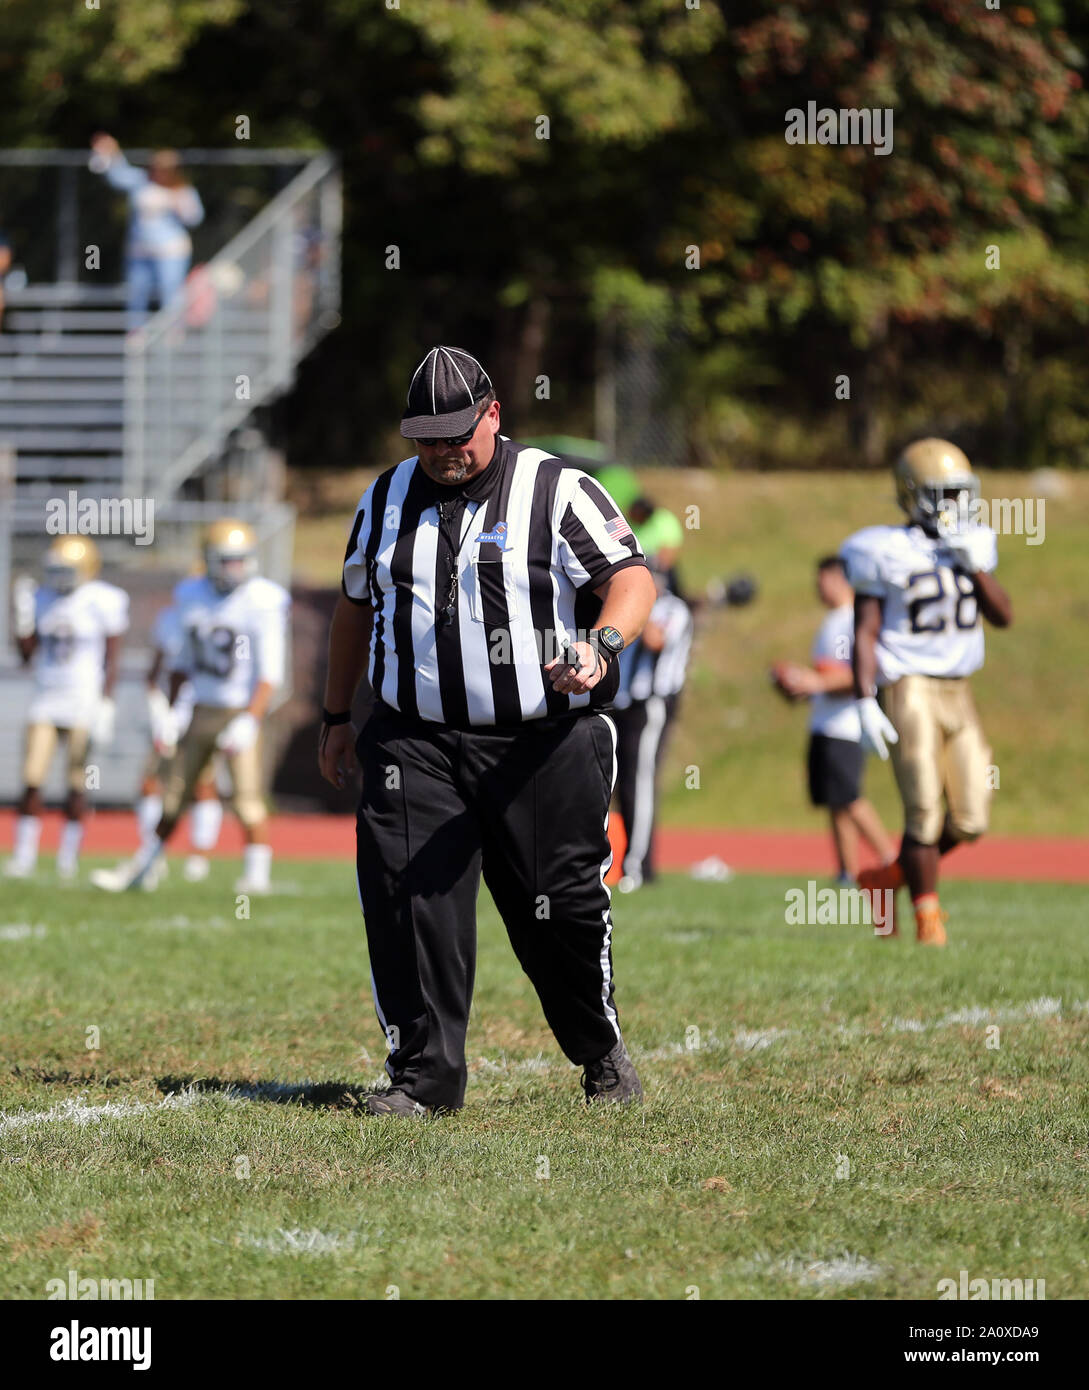 An overweight game official at a high school football game Stock Photo